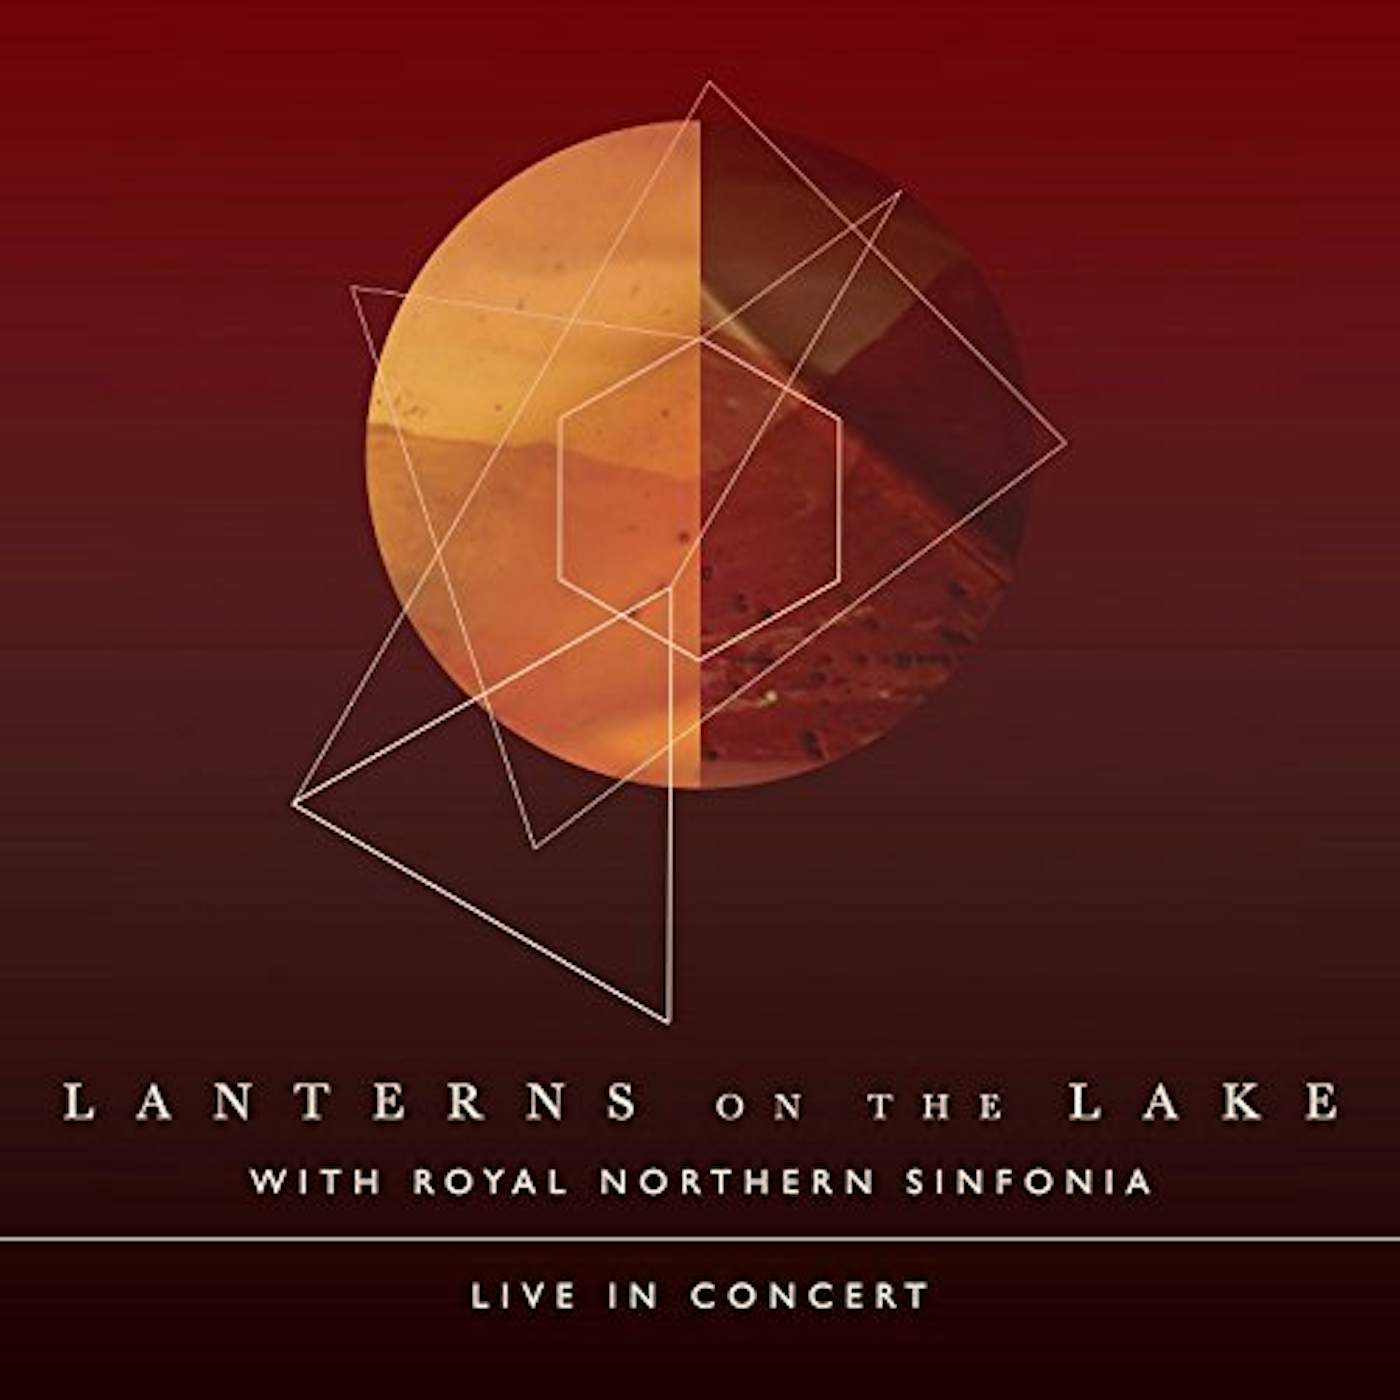 Lanterns on the Lake Live With Royal Northern Sinfonia Vinyl Record